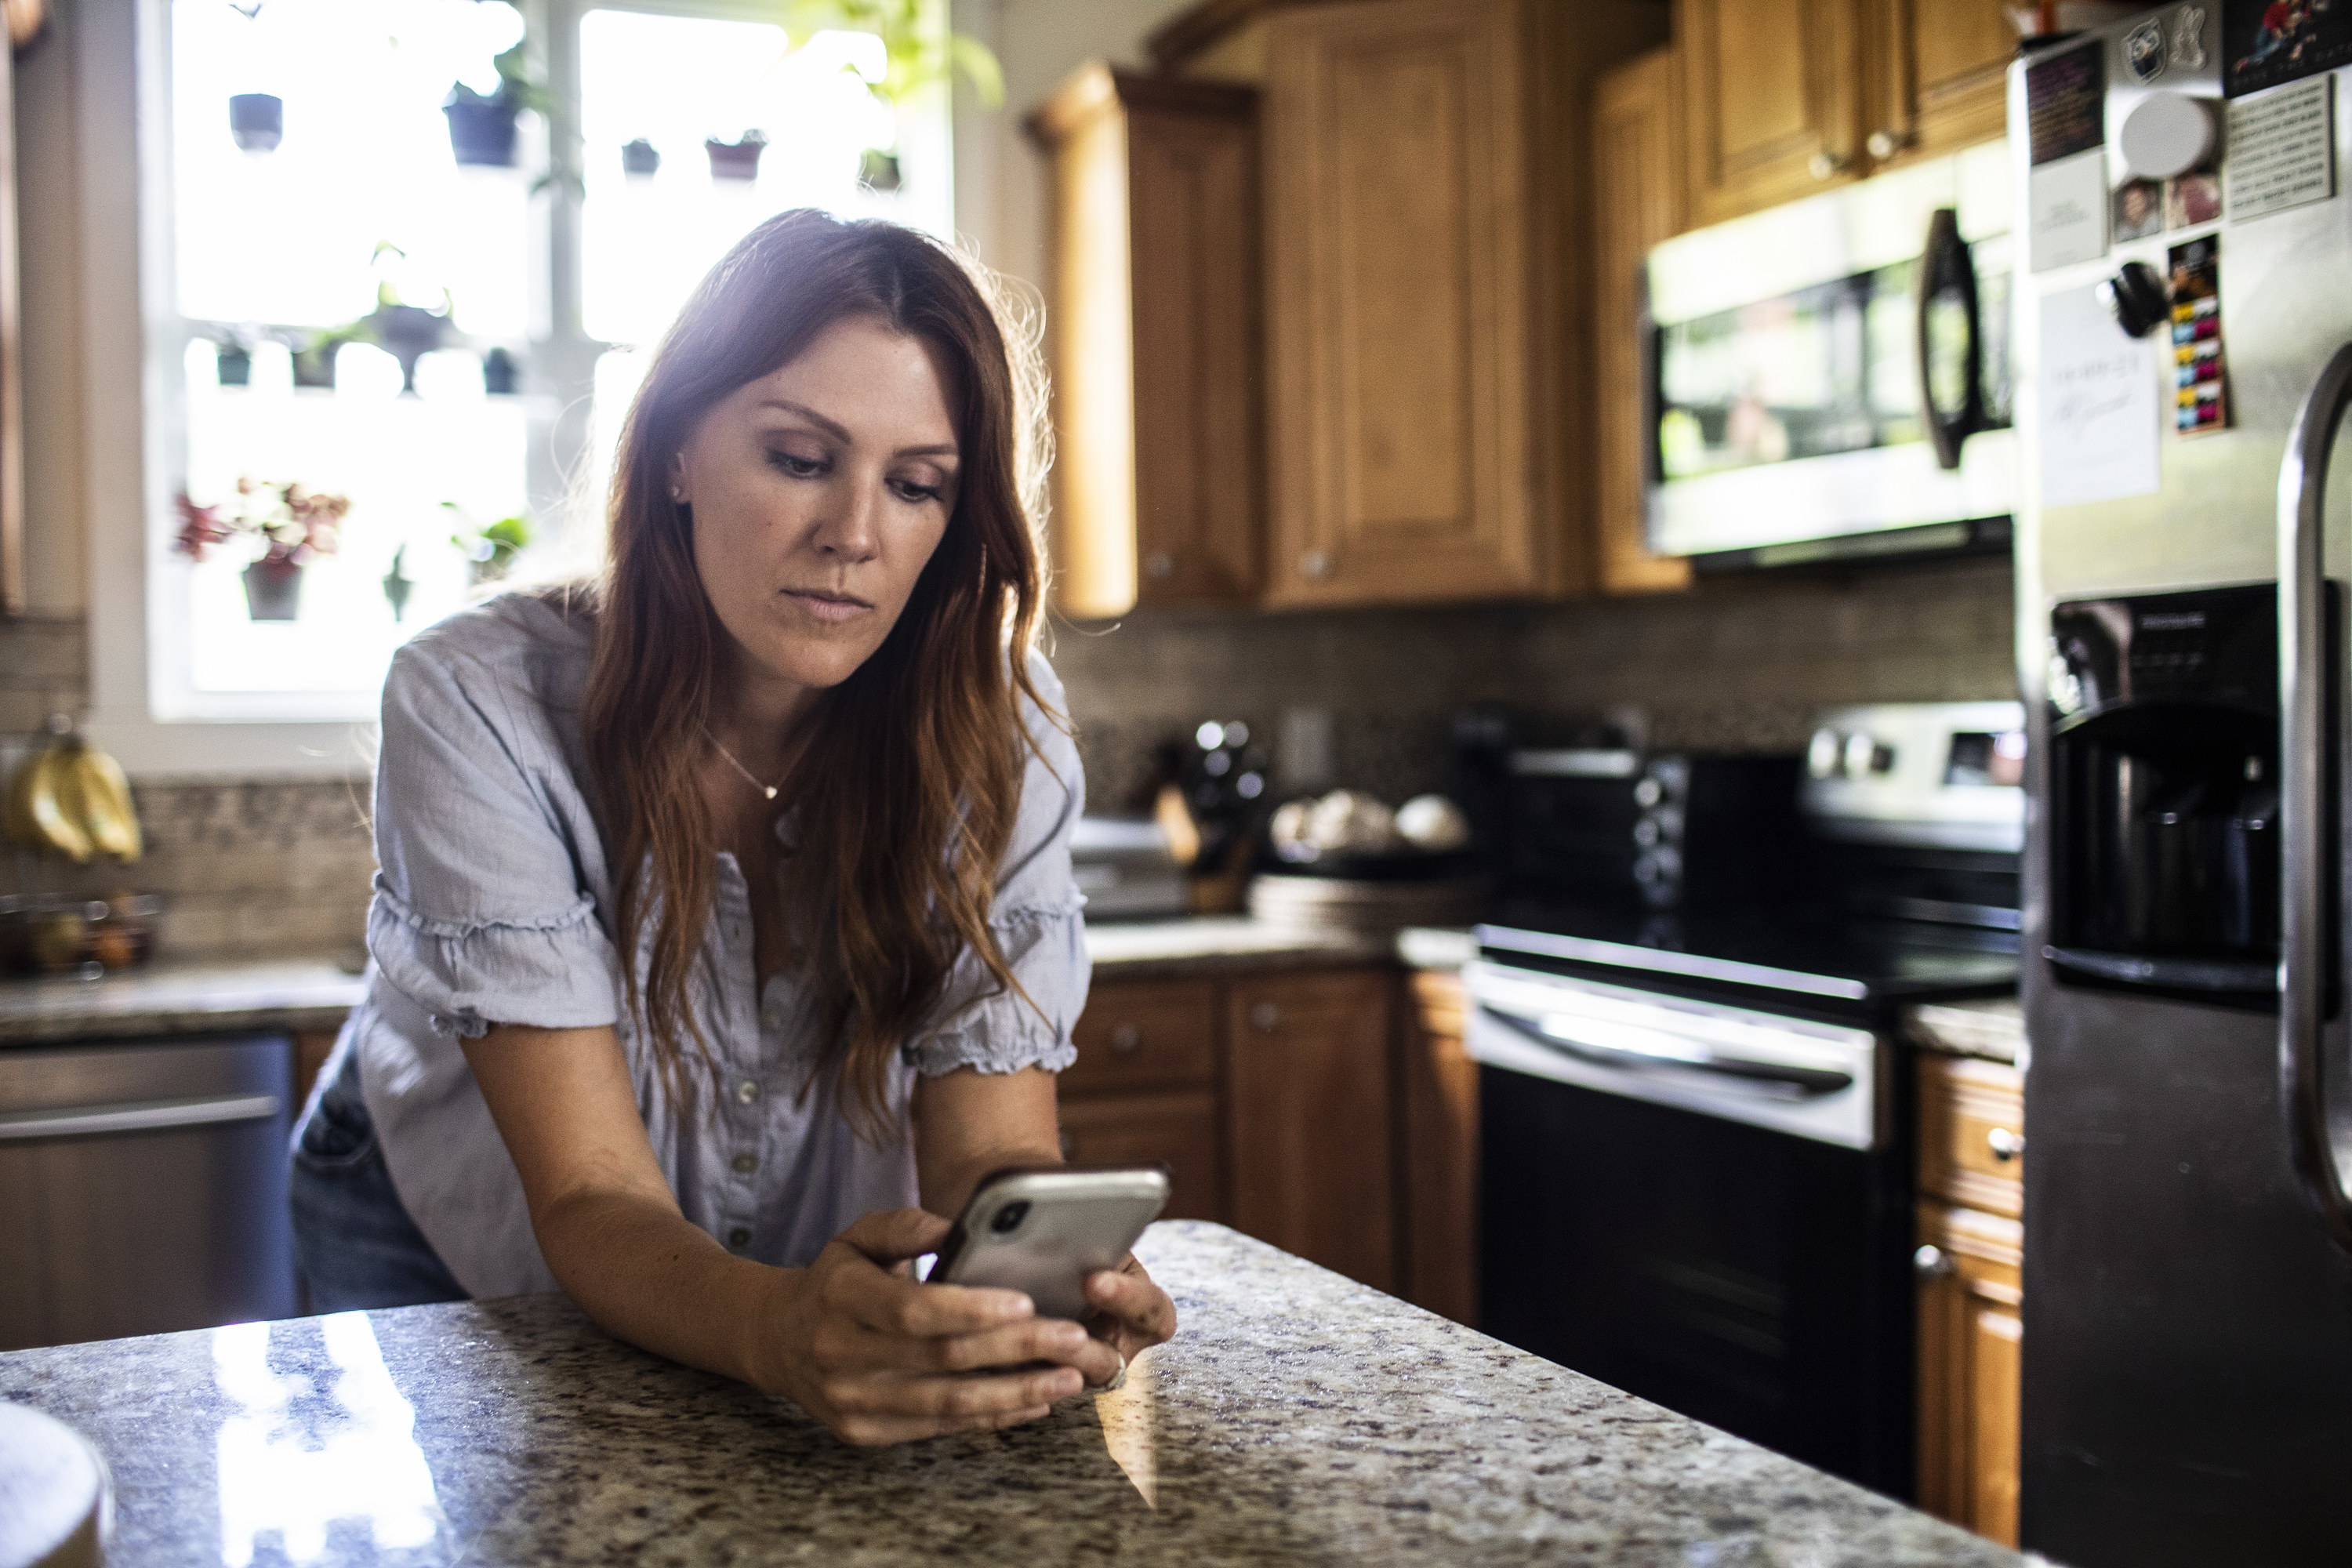 woman looking at her phone while leaning on her kitchen counter